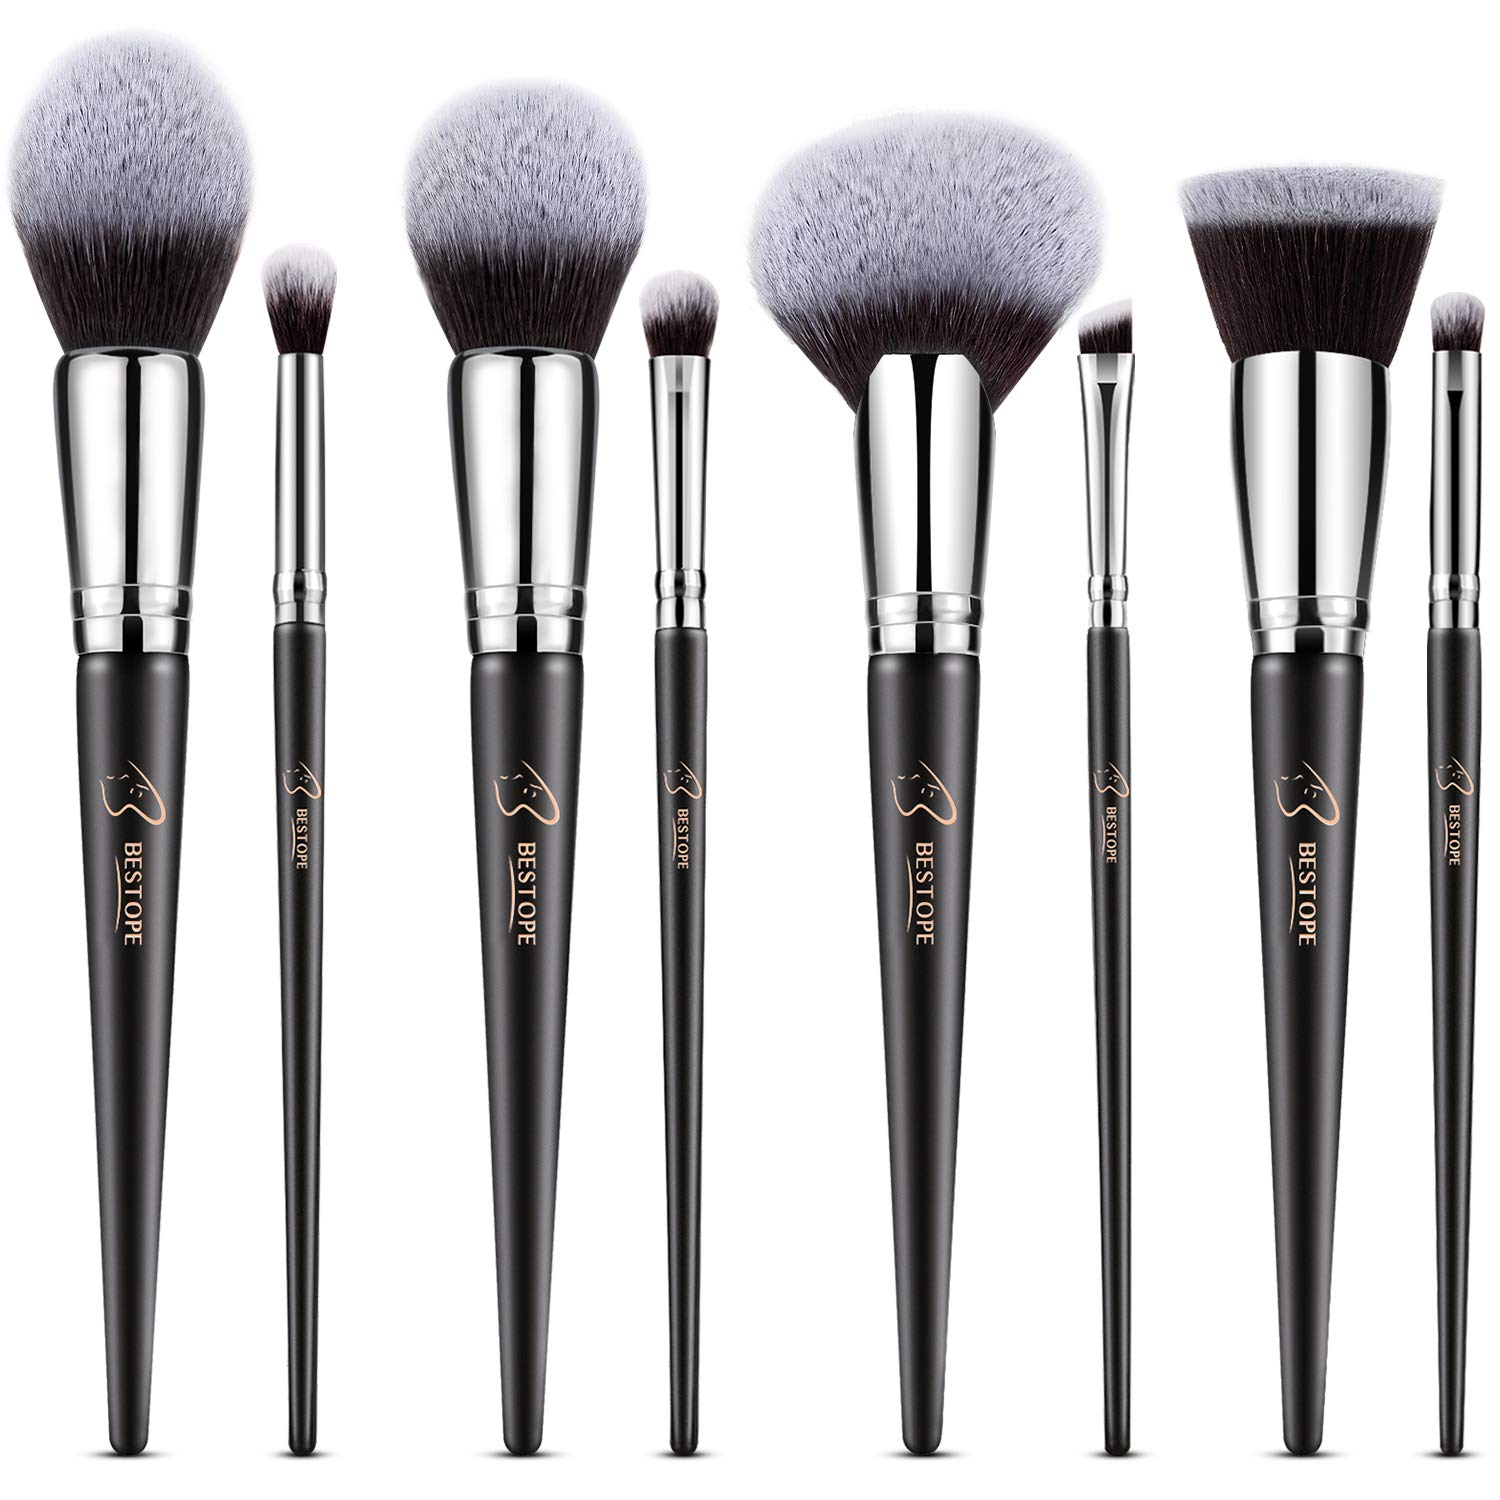 BESTOPE Tapered Handle Makeup Brushes, 8-Piece